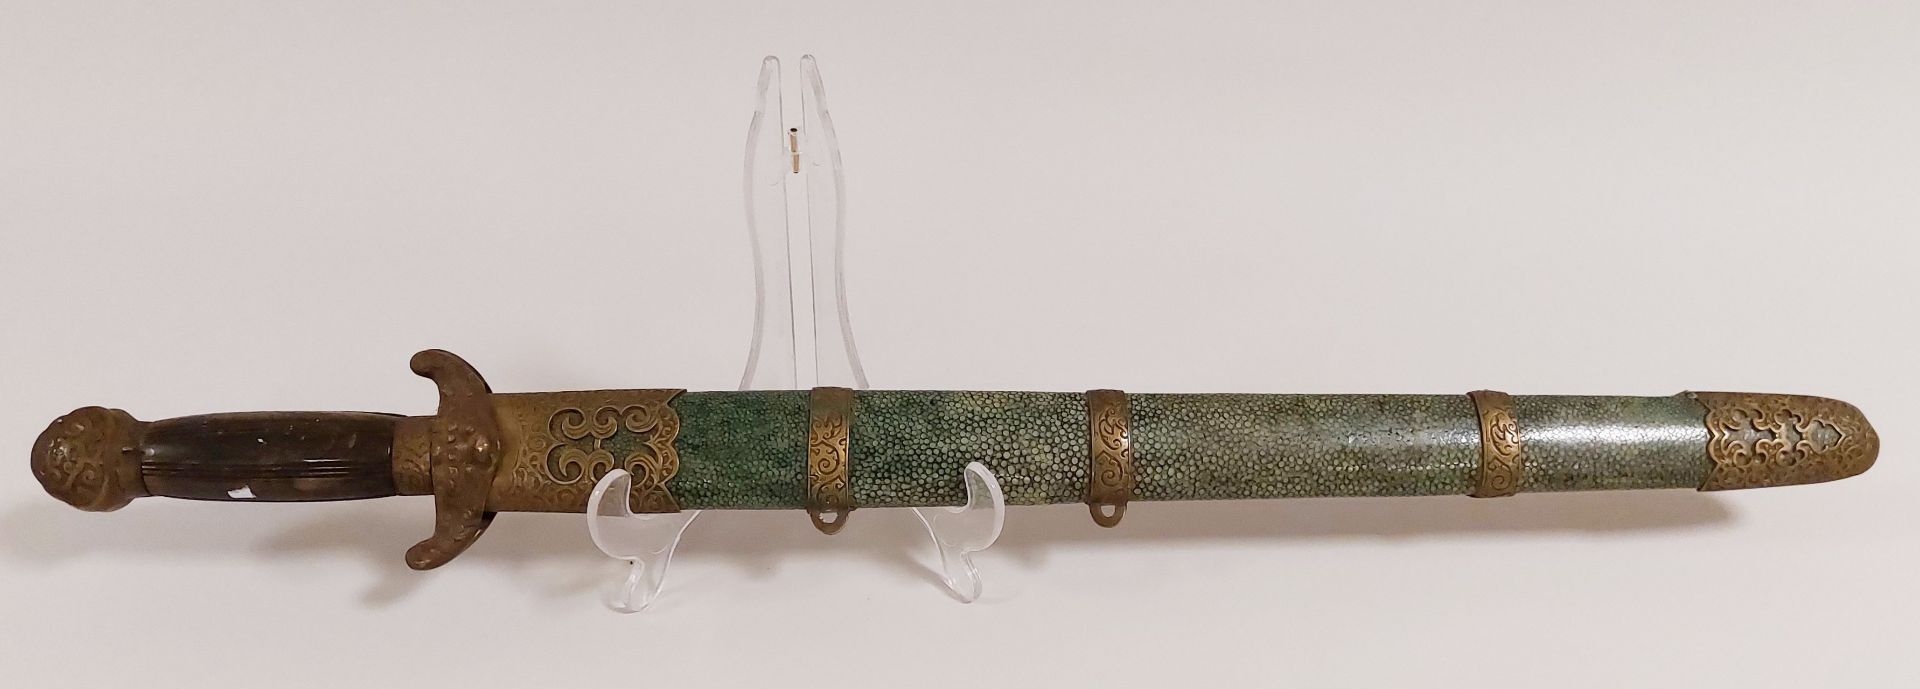 Rare Chinese/Japanese double sword - Image 5 of 5